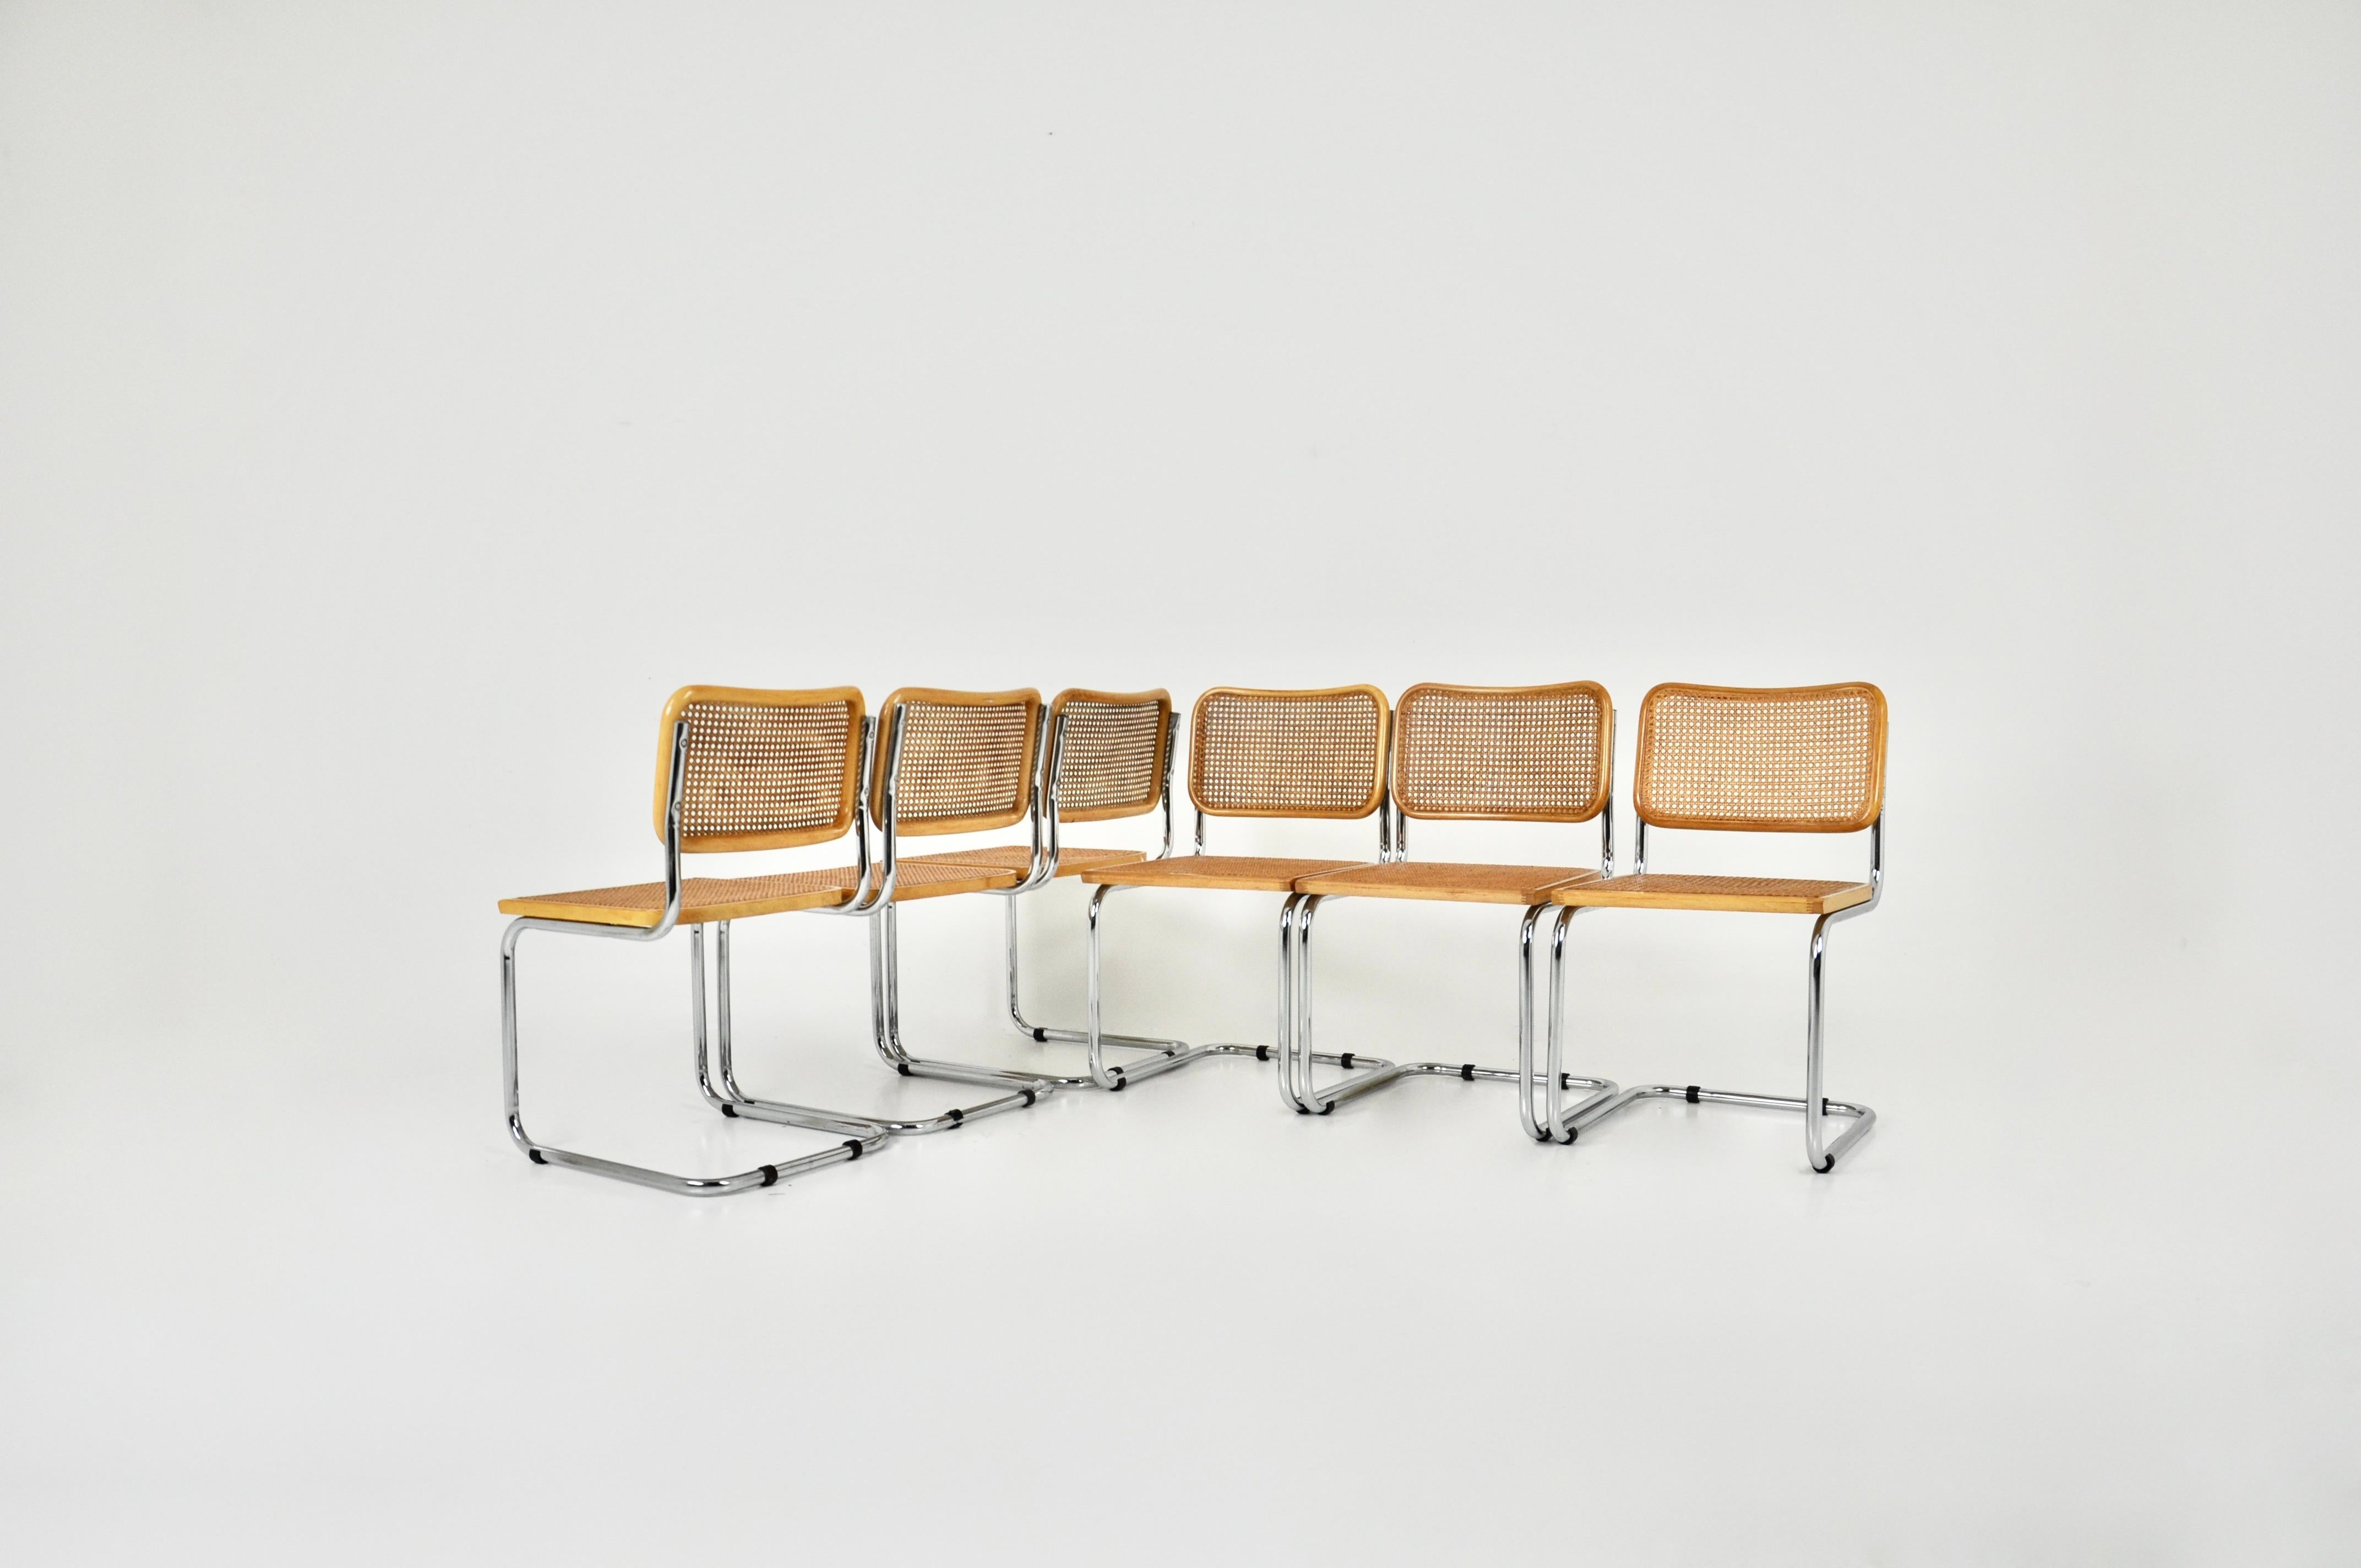 Set of 6 chairs in metal, wood and rattan. Dimensions: seat height: 45 cm. Wear due to time and age of chairs